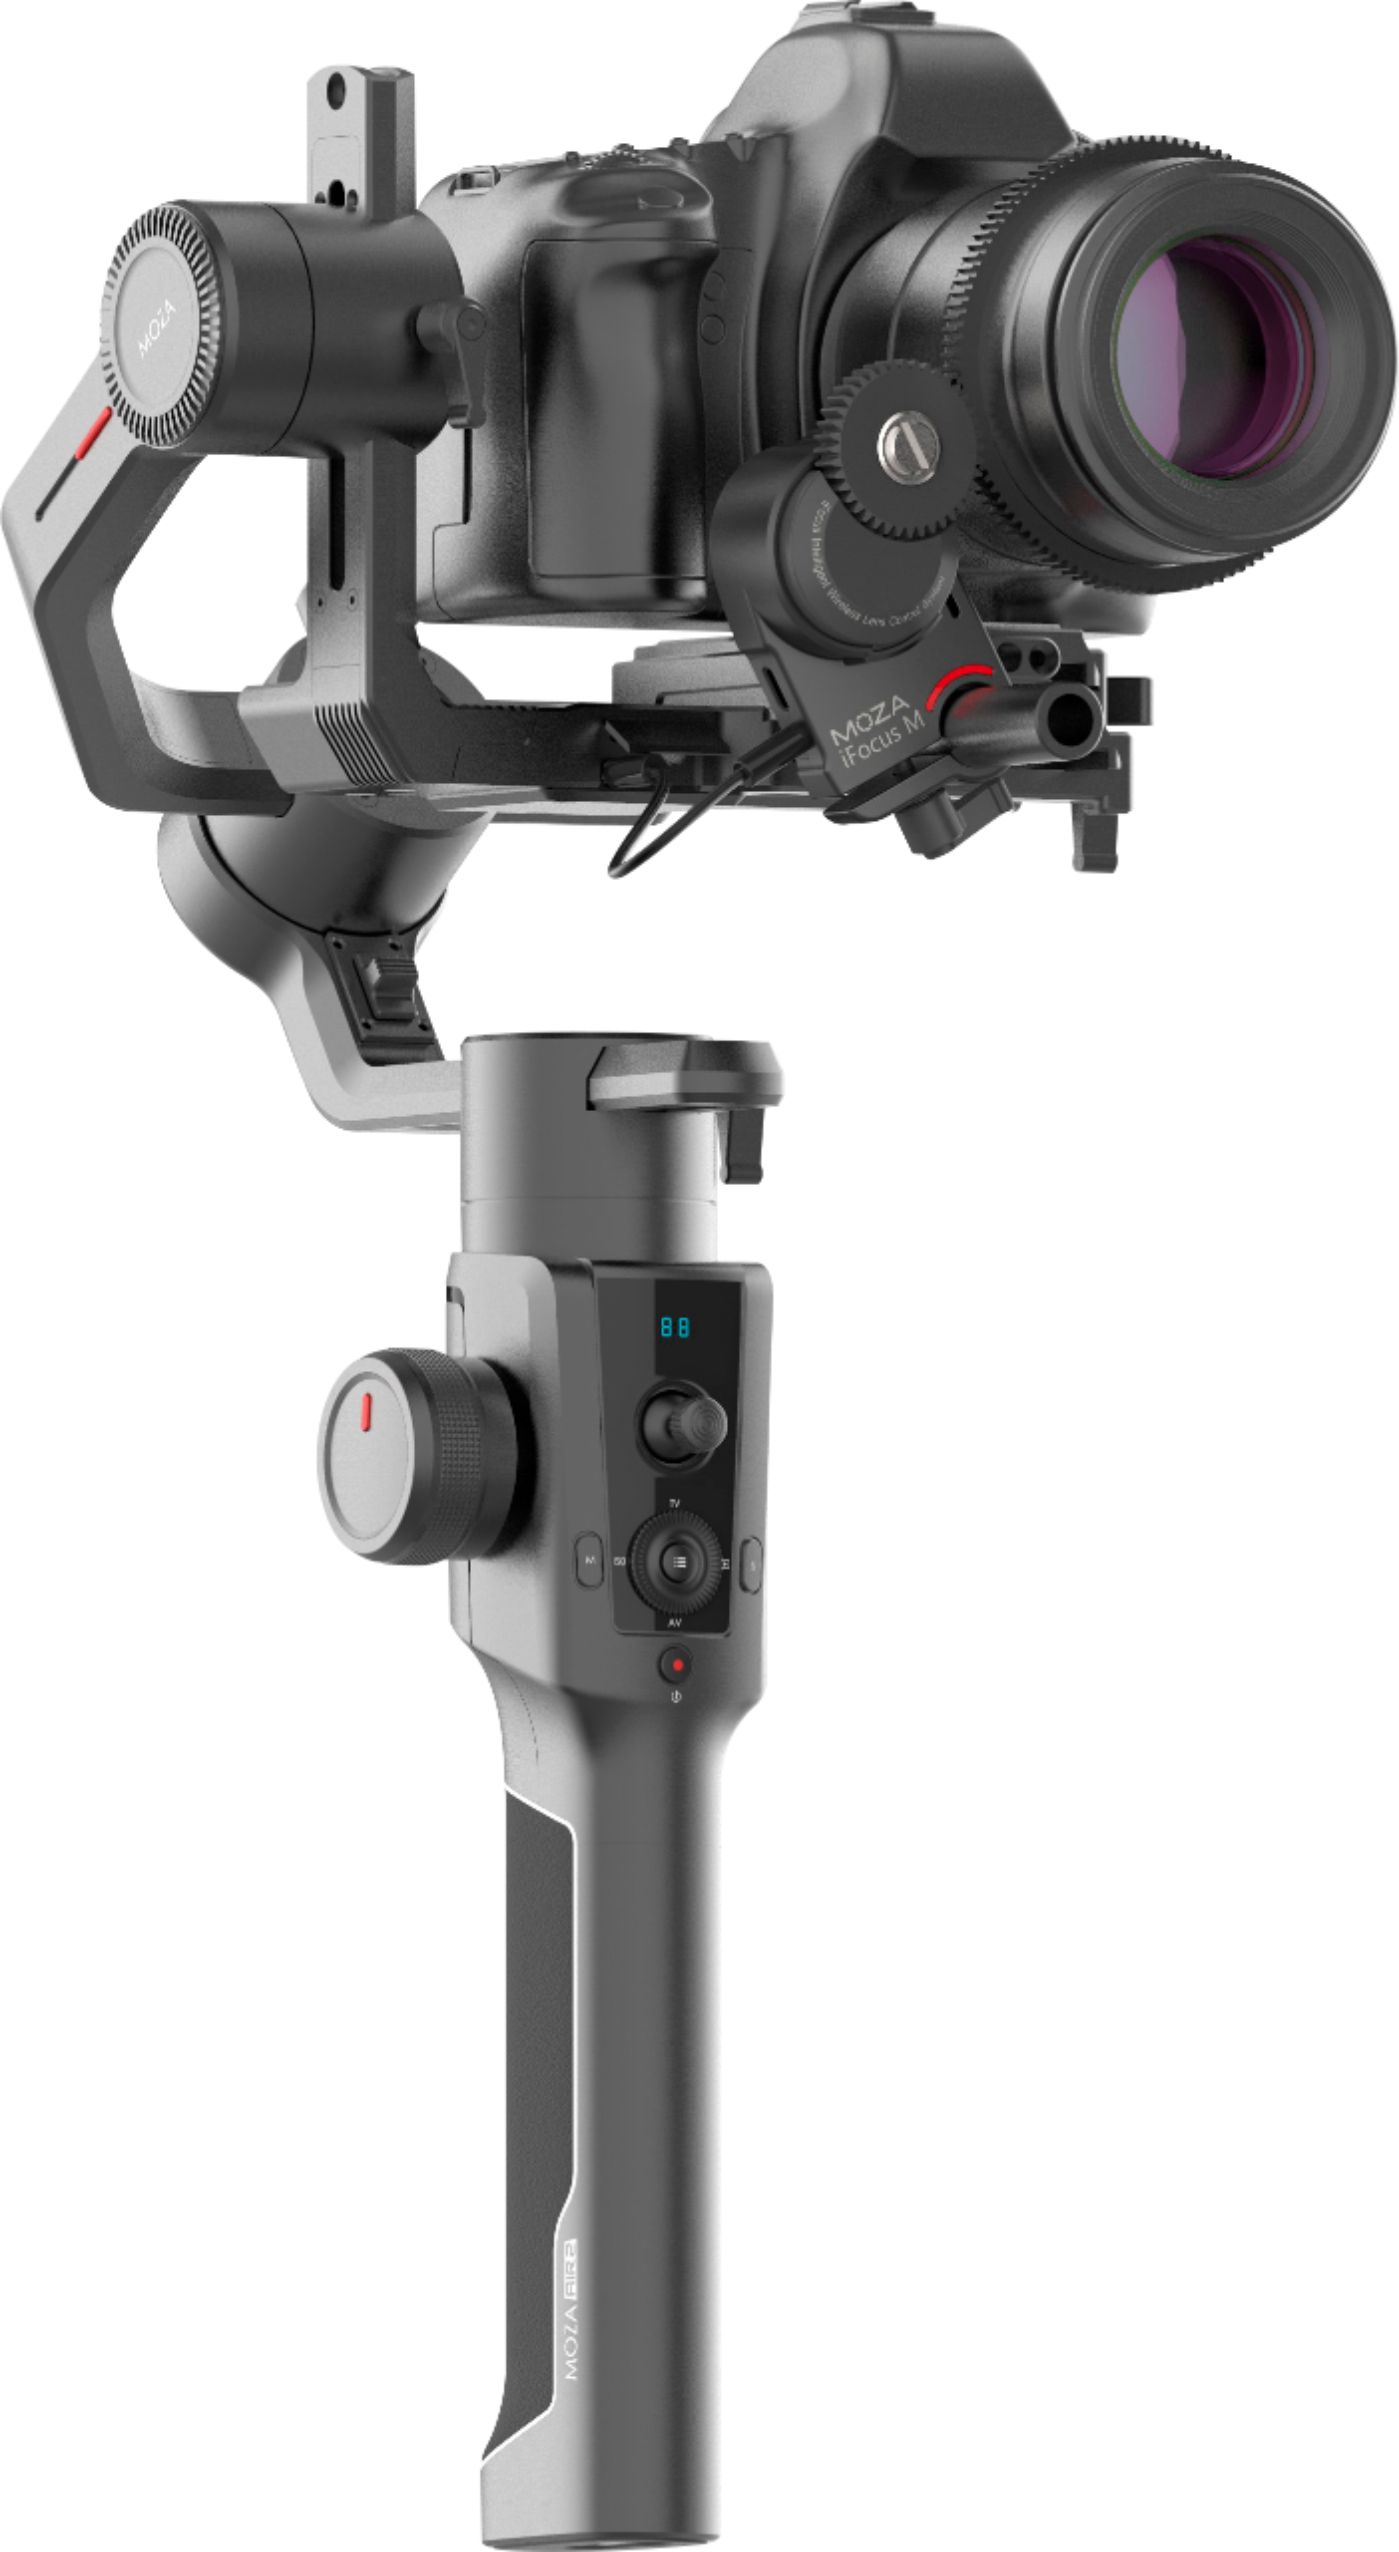 Angle View: Moza - Air 2 3-Axis Handheld Gimbal Stabilizer for DSLR and Mirrorless Cameras